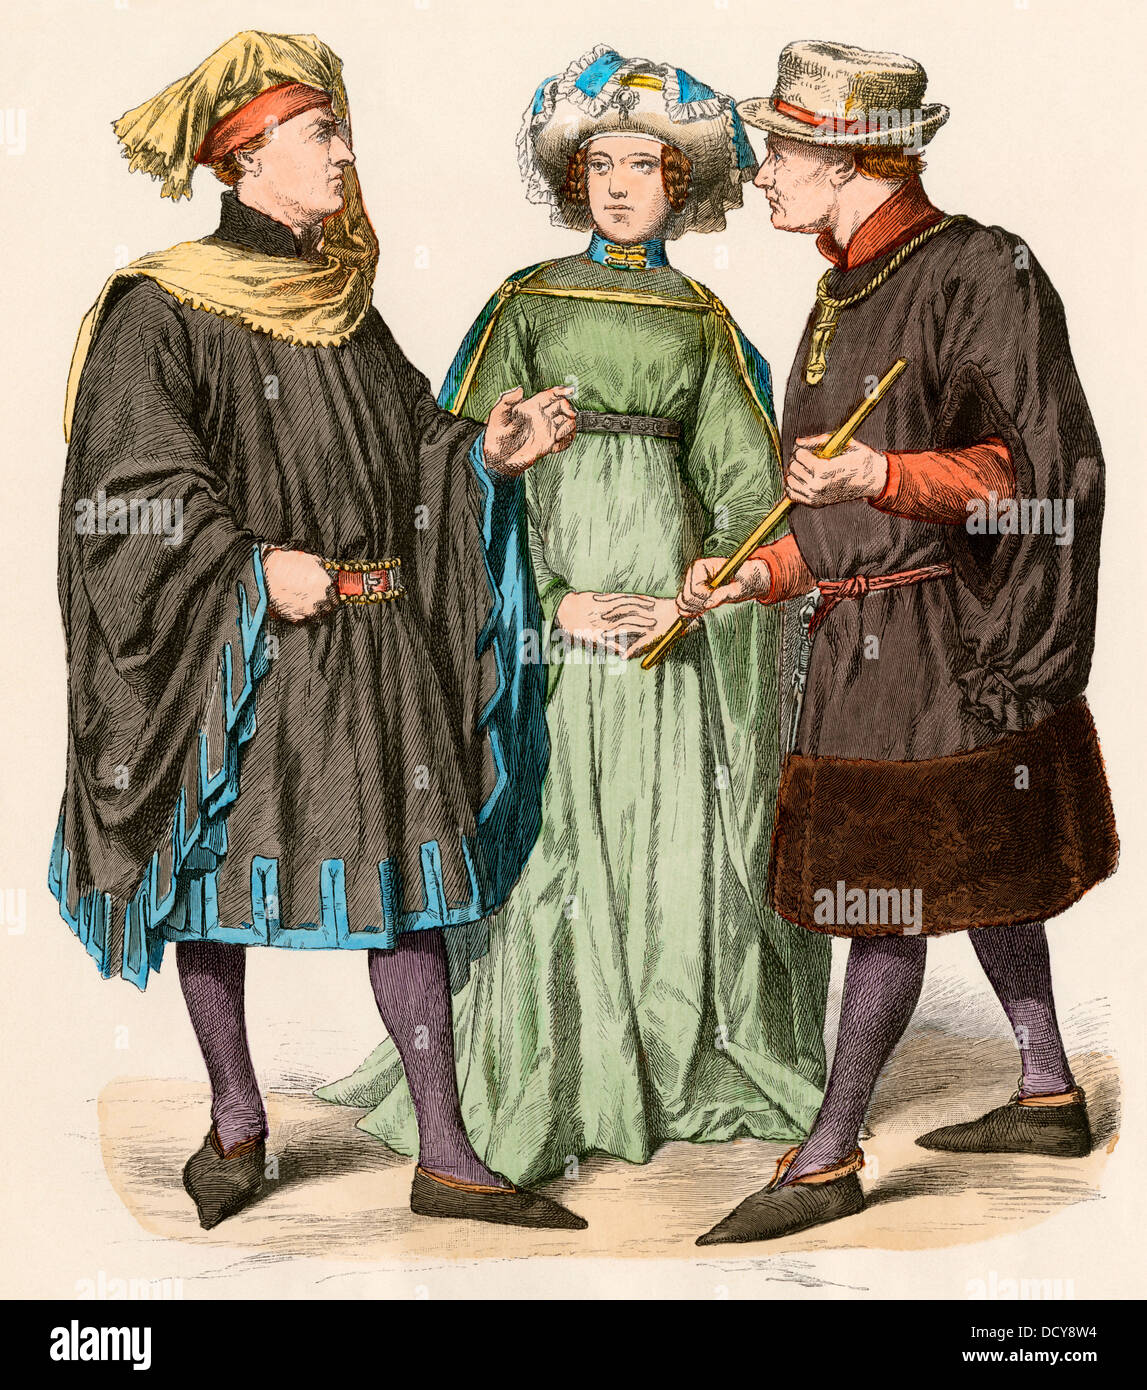 Historically Accurate 1400s Dresses | vlr.eng.br